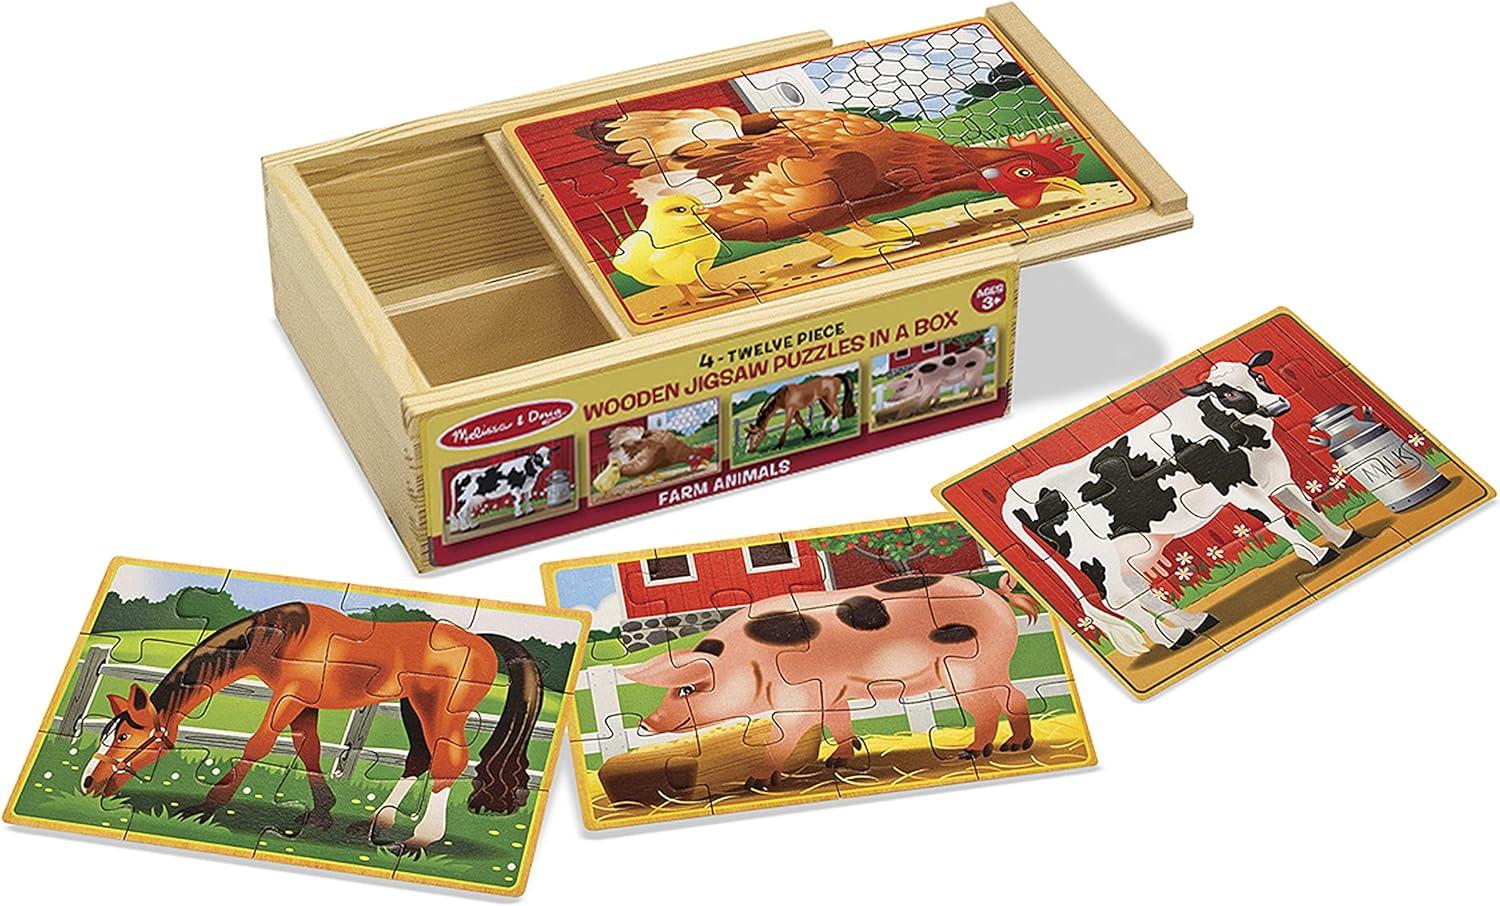 Melissa and Doug Farm 4-in-1 Wooden Jigsaw Puzzles in a Storage Box for $8.81